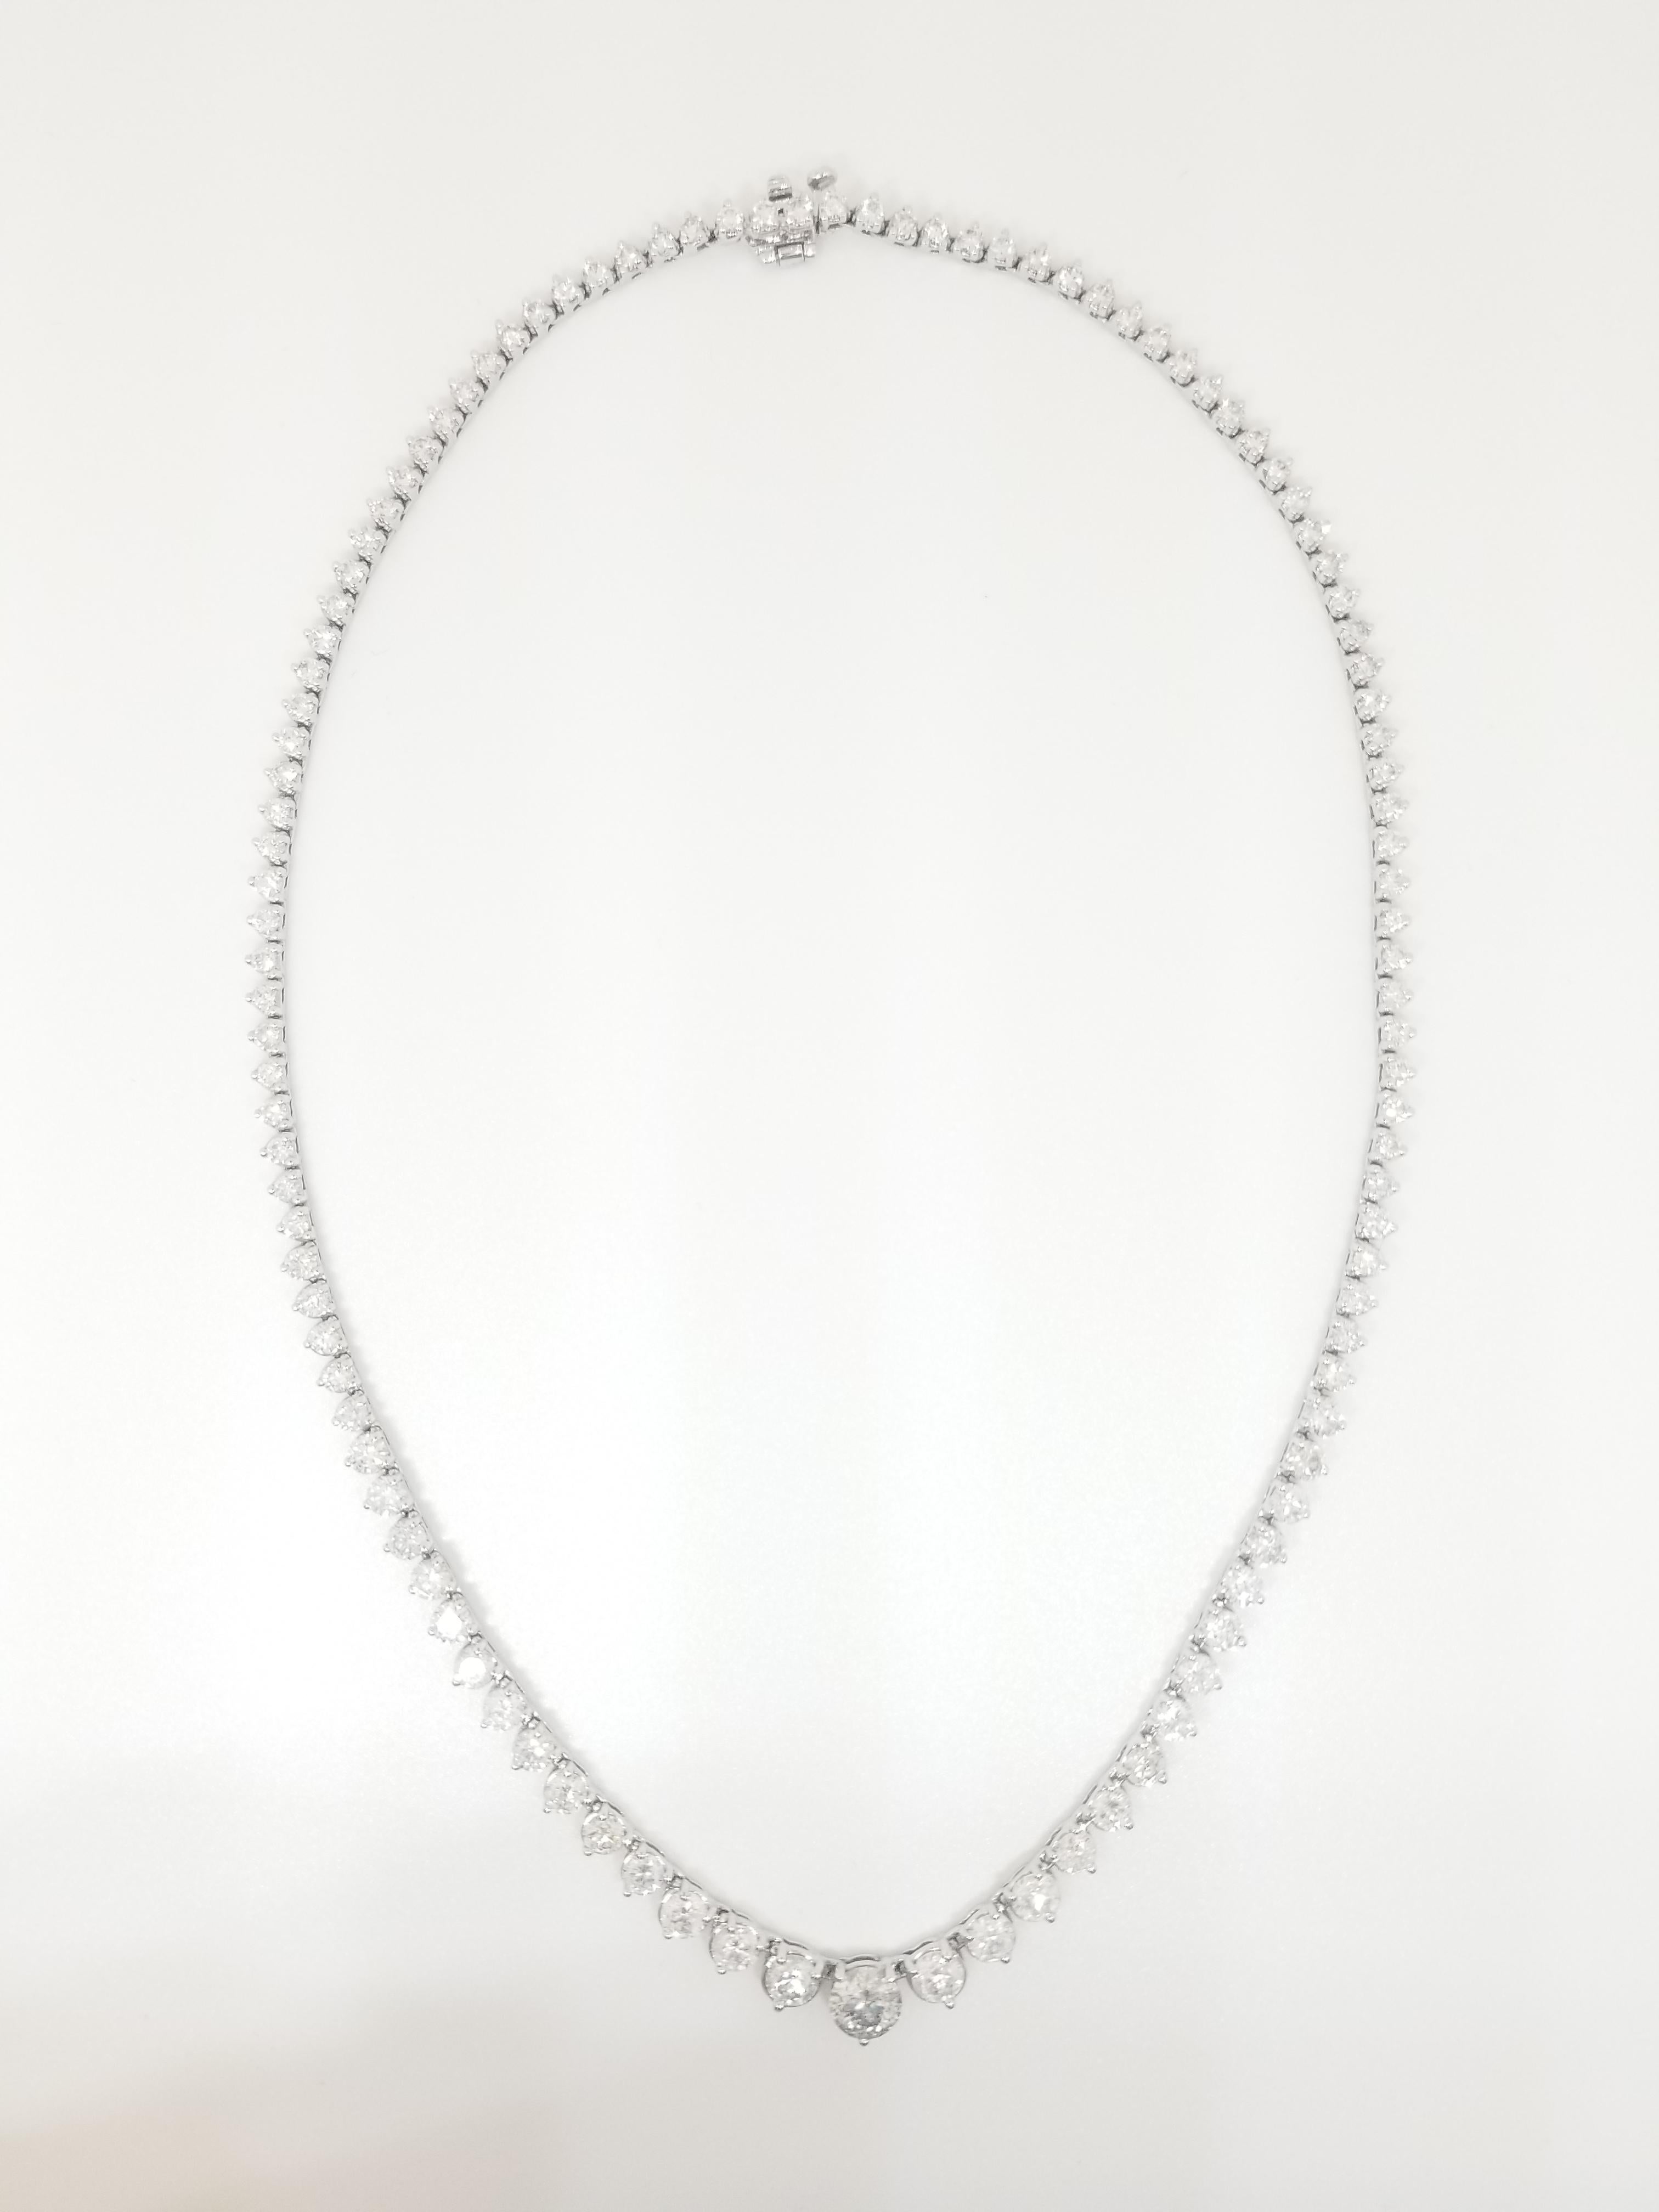 Stunning 14 Karat White Gold Round Brilliant Cut Diamond Tennis Necklace set on 3- prong setting. The total diamond weight is 12.50 carats. They taper in size top to bottom from 2mm to a 5mm. The closure is an insert clasp with safety clasp. Length